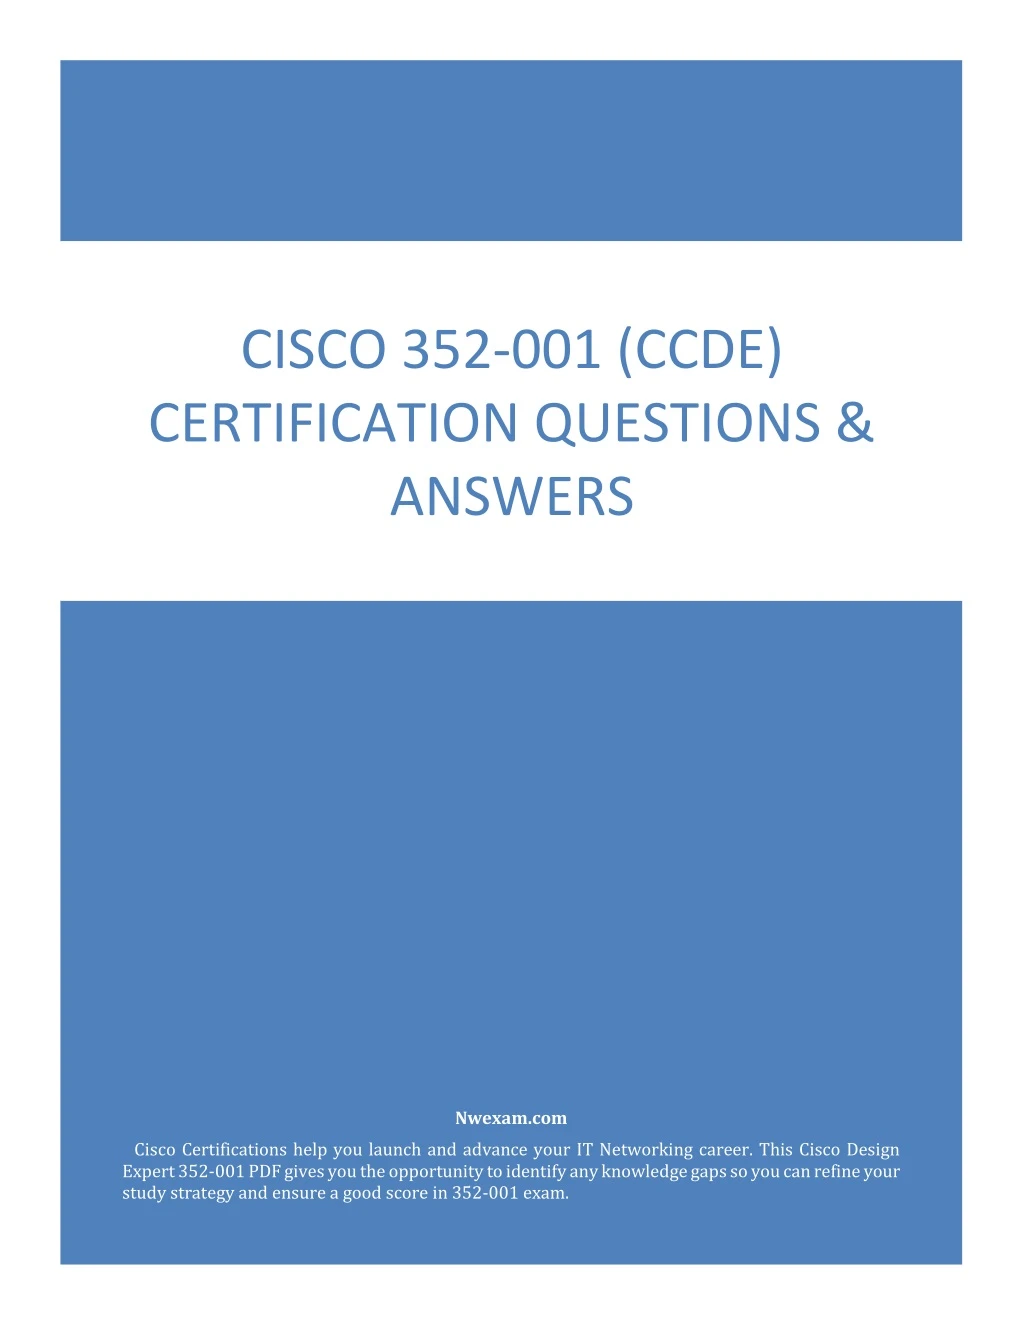 cisco 352 001 ccde certification questions answers